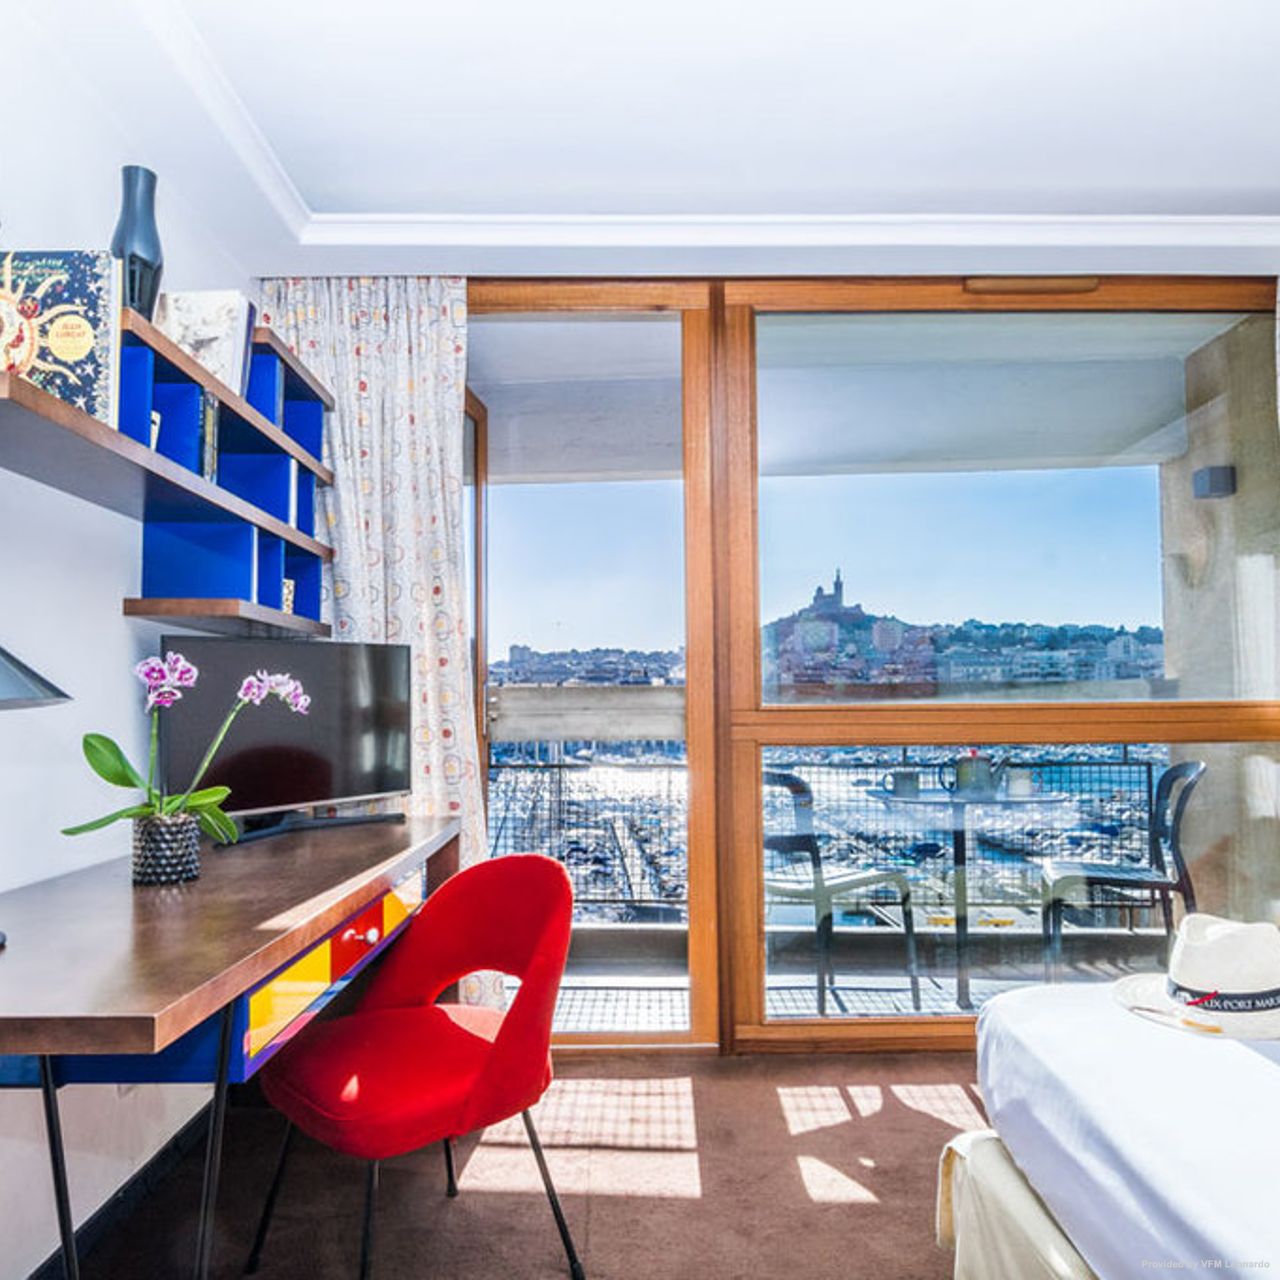 Hotel La Residence du Vieux Port - Marseille - Great prices at HOTEL INFO